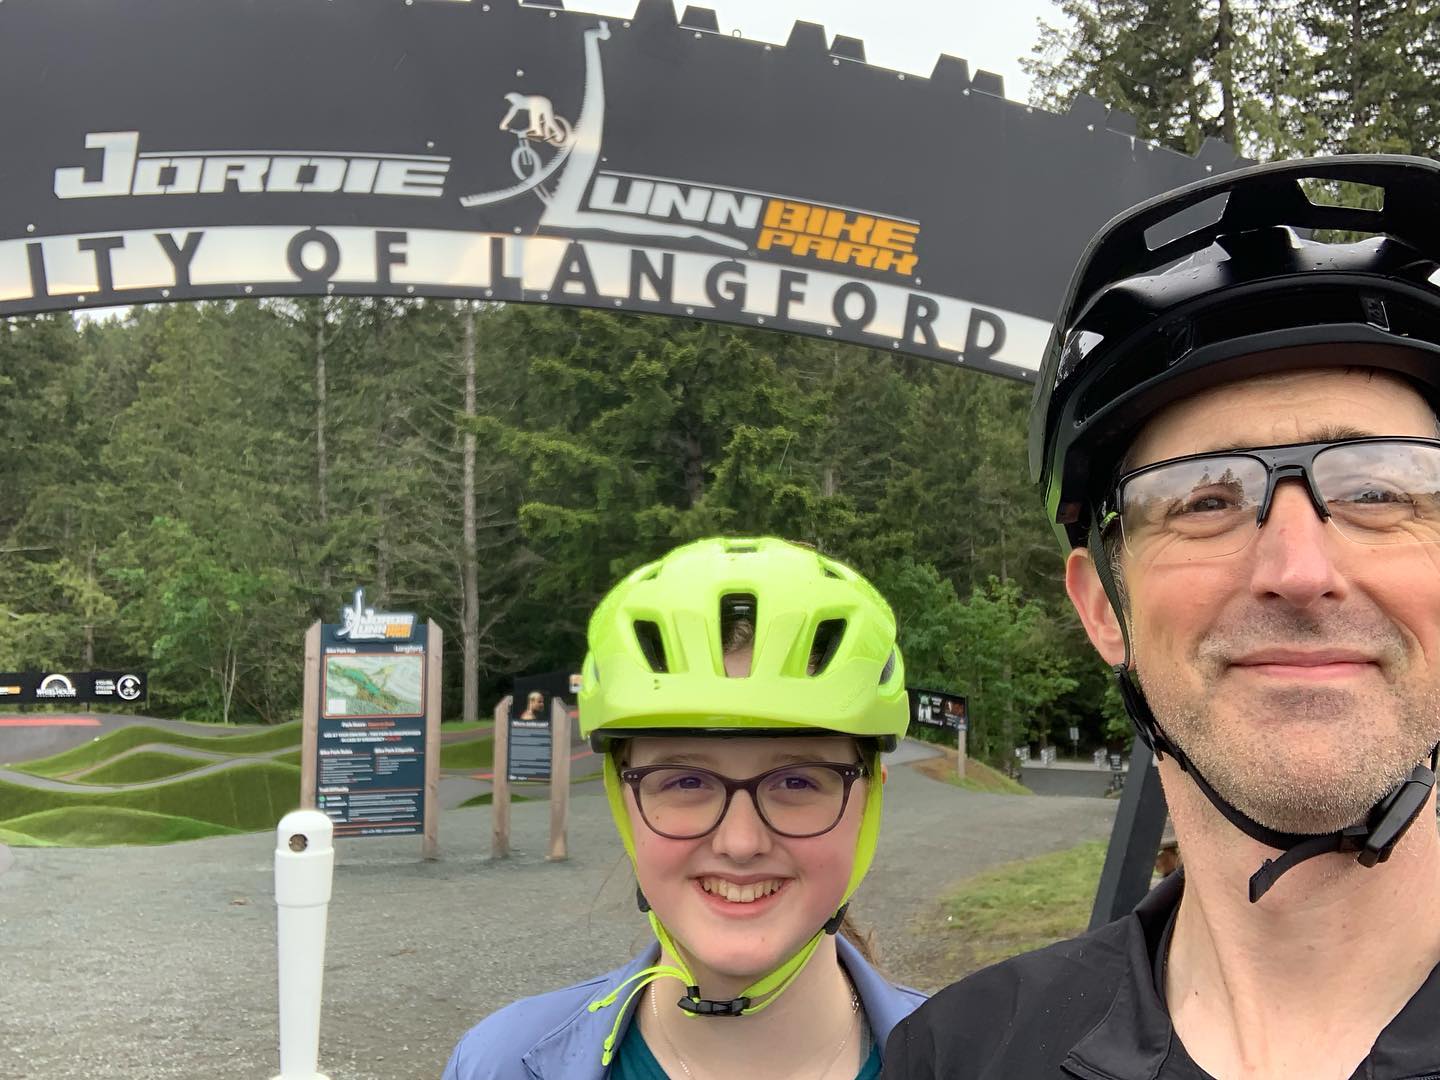 Today A and I went to check out the @jordielunnbikepark Gold Rush was a lot of fun. I’m looking forward to trying the rest of the trails sometime. #mtbvi #yyj #mountainbiking #bikesarefun